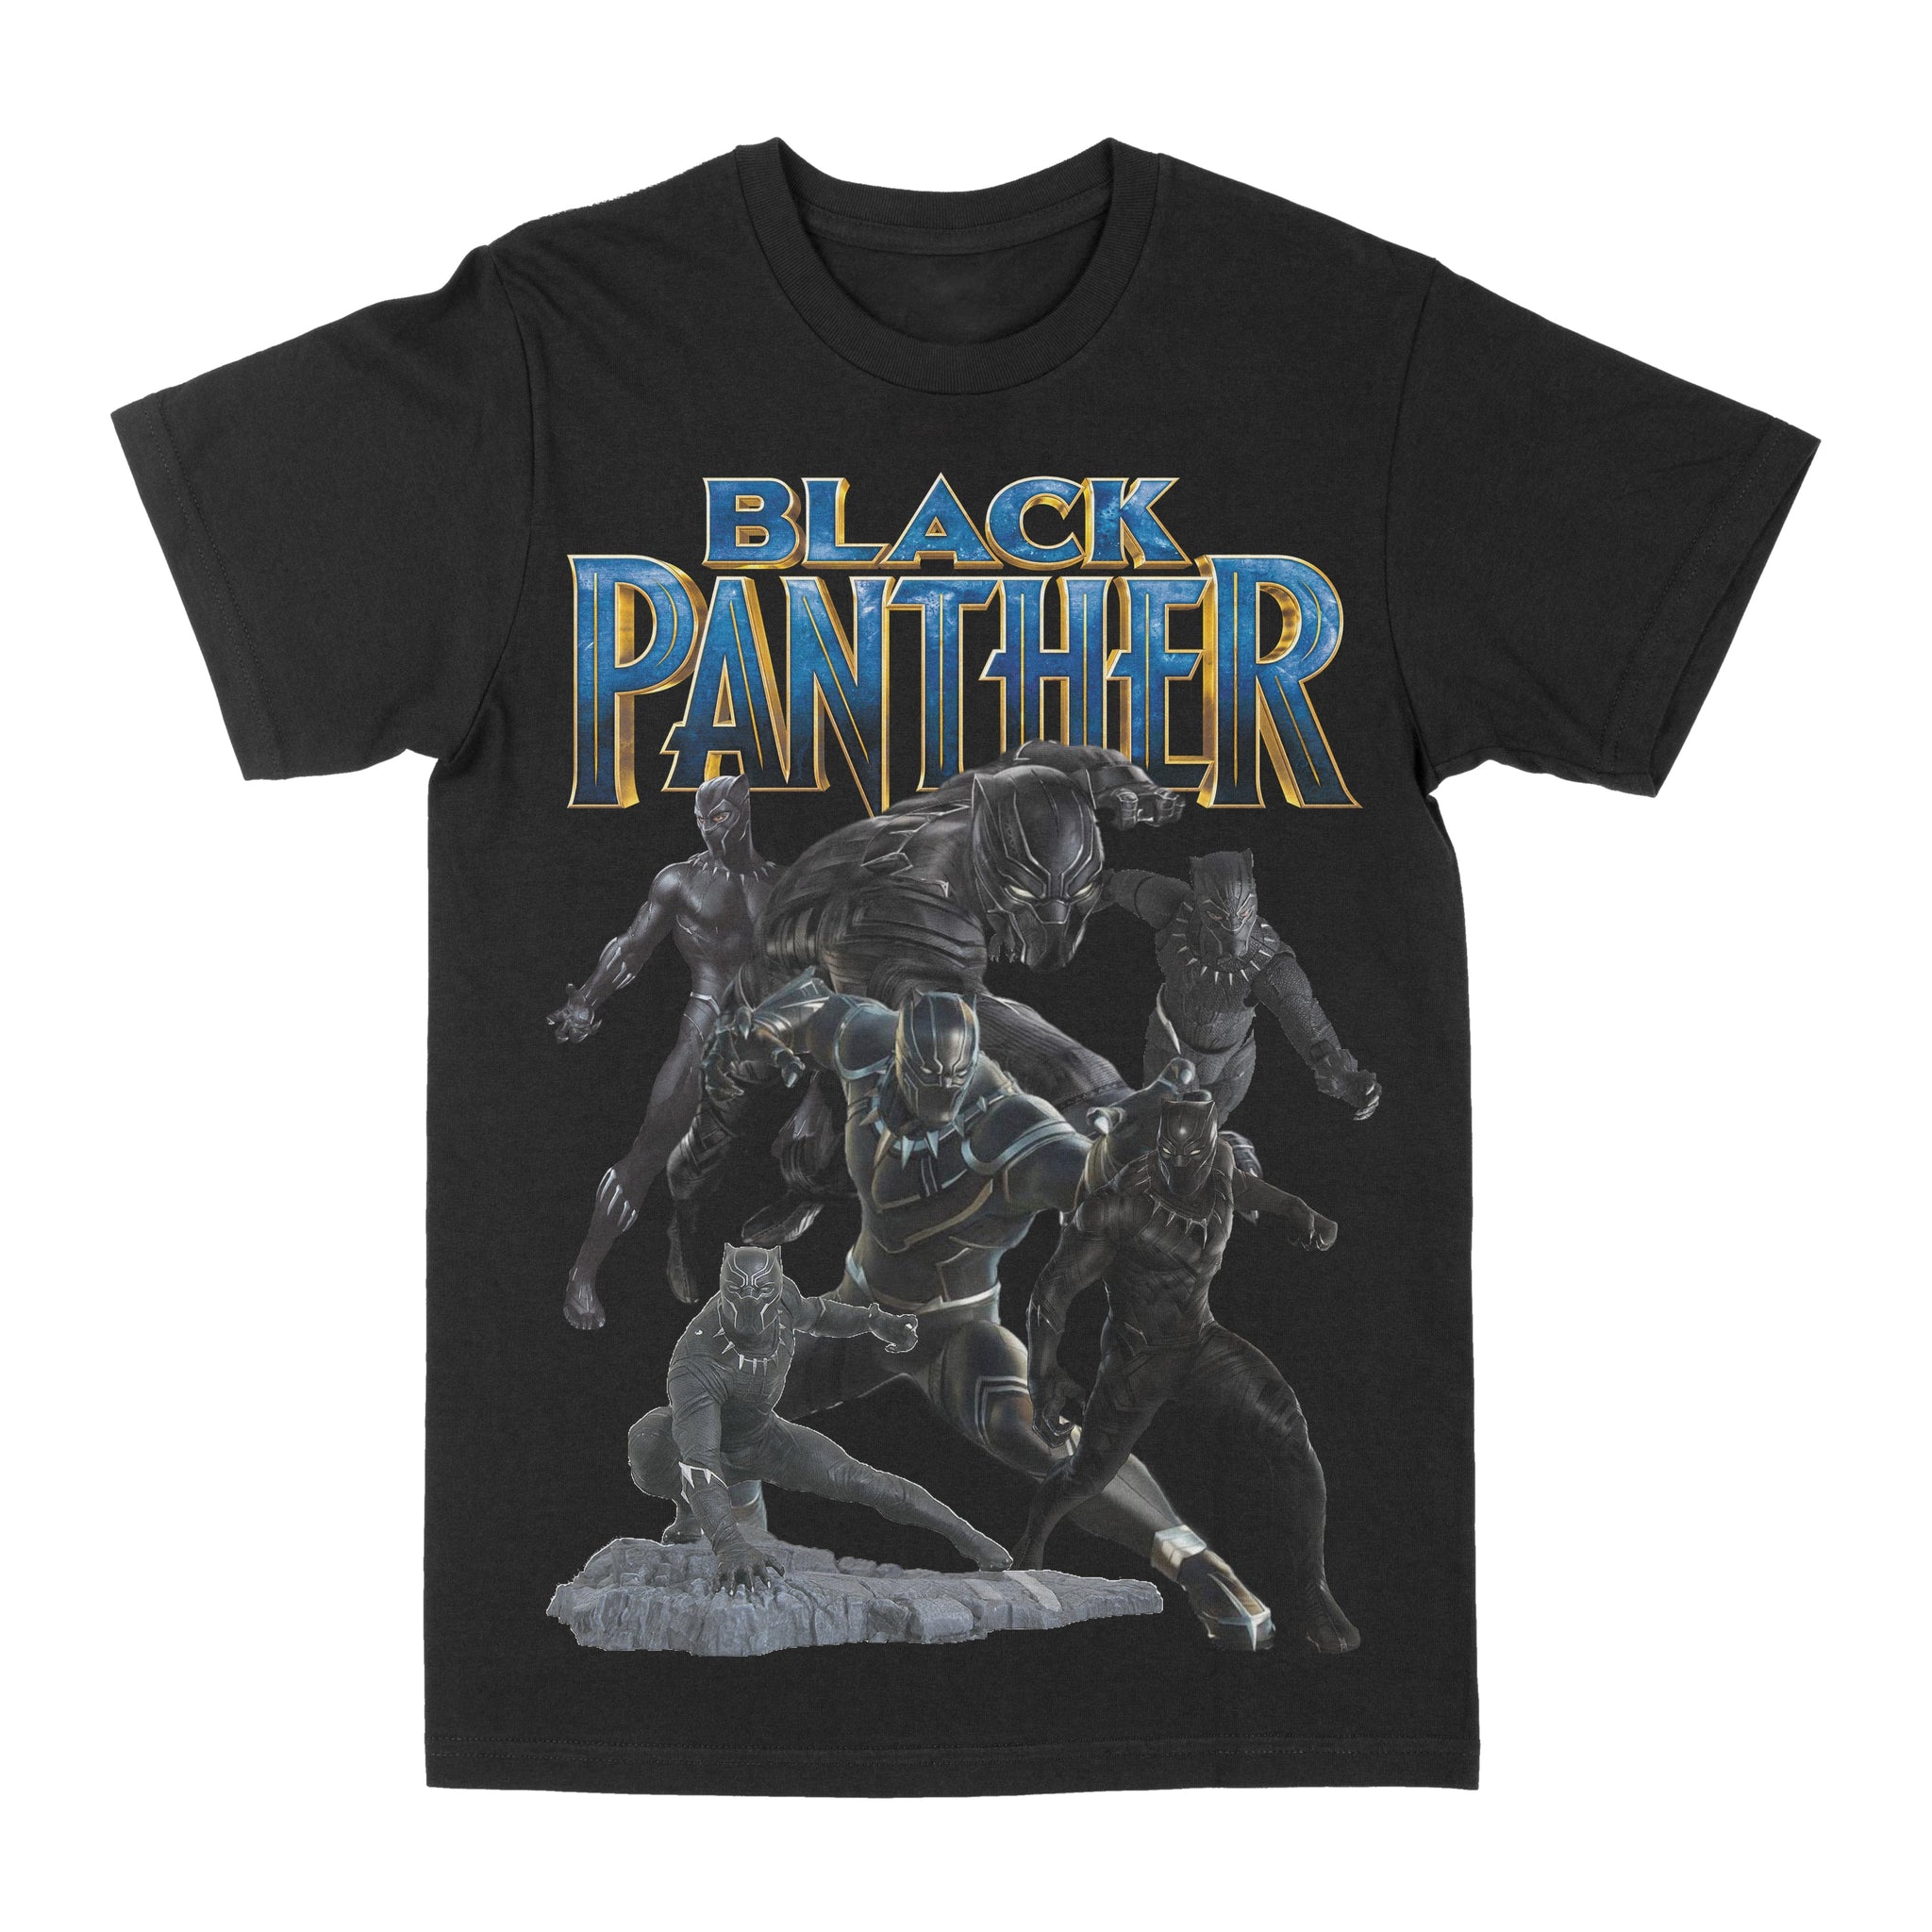 Black Panther Graphic Tee